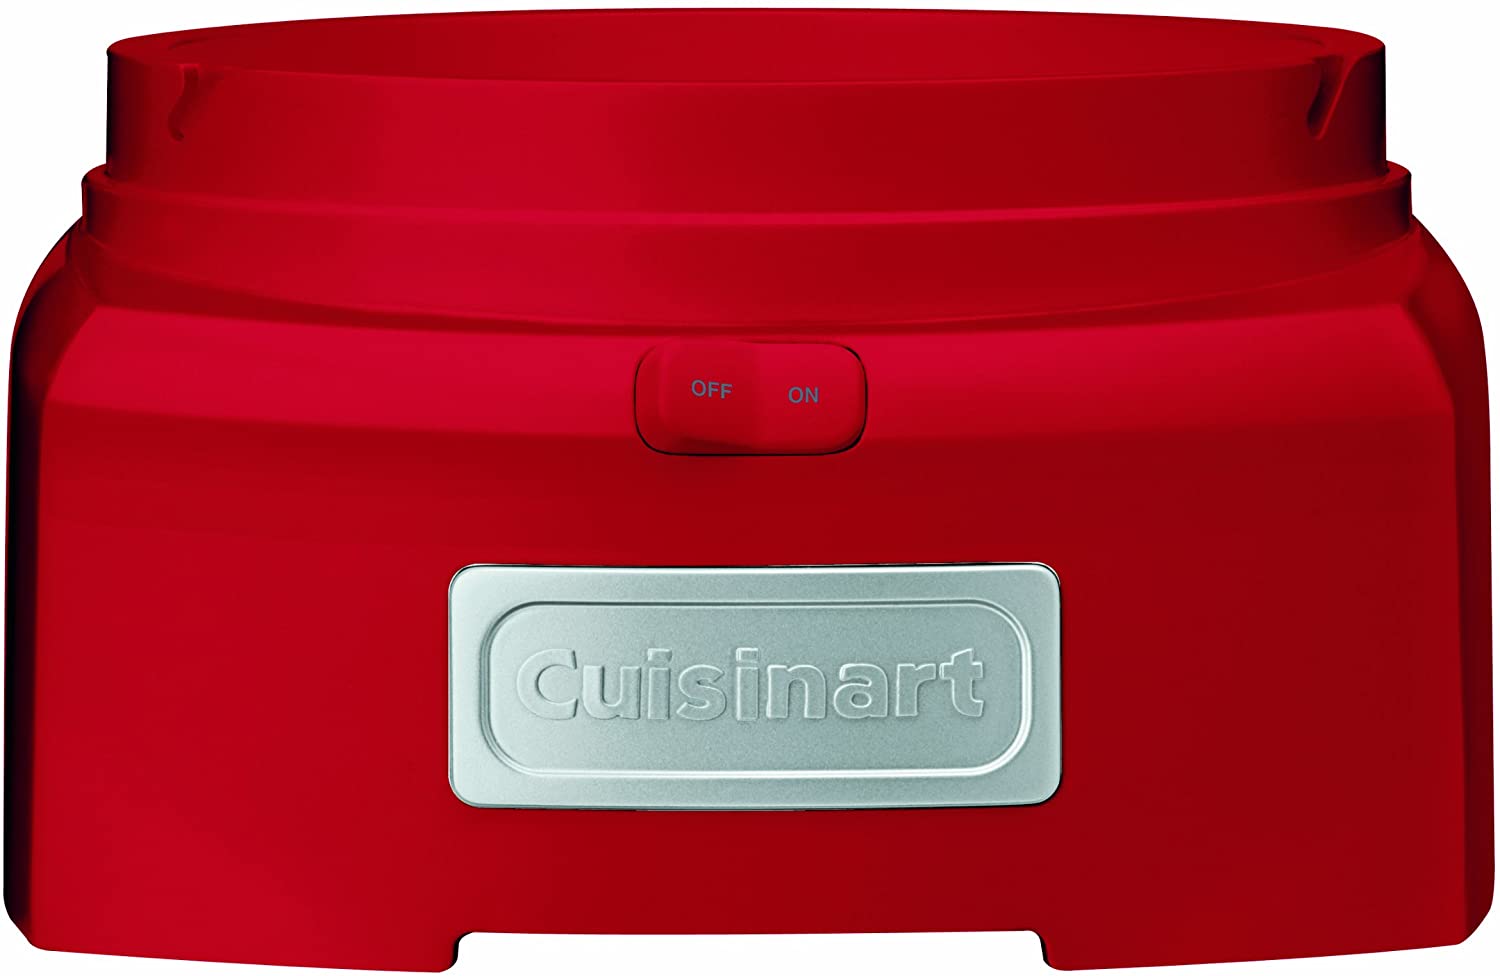 Cuisinart ICE-21RFR ICE21R Ice Cream Maker 1- 1/2 qt, Red - Certified Refurbished